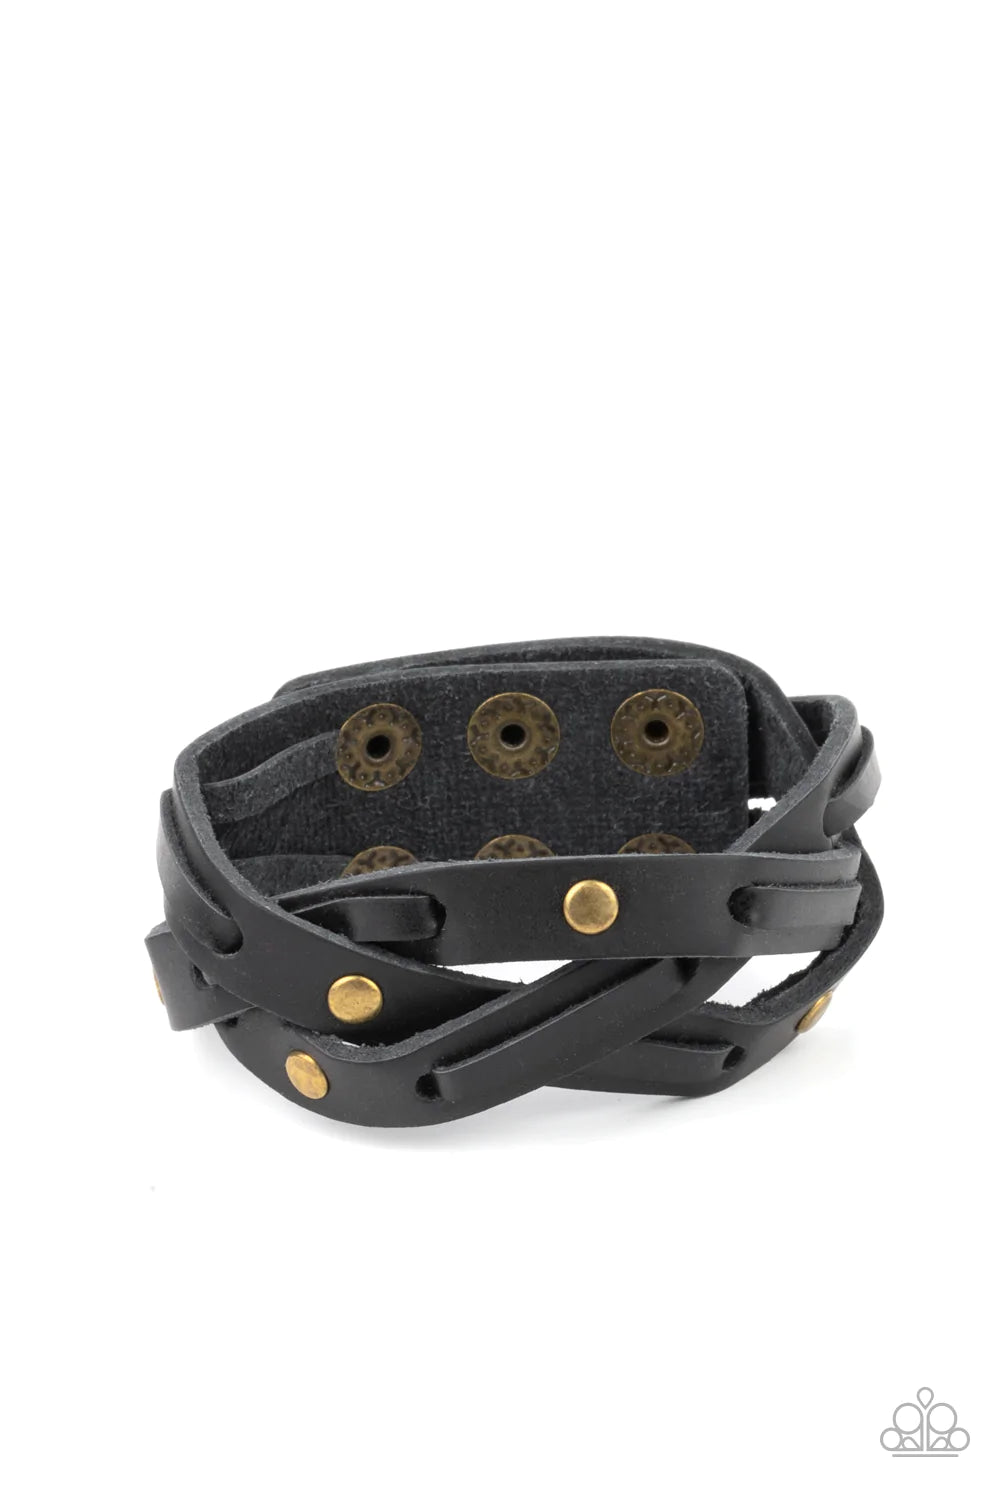 Paparazzi Accessories Rugged Roundup - Brass Featuring sections of brass studs and black leather laces, black leather bands weave into a rugged braid around the wrist. Features an adjustable snap closure. Sold as one individual bracelet.